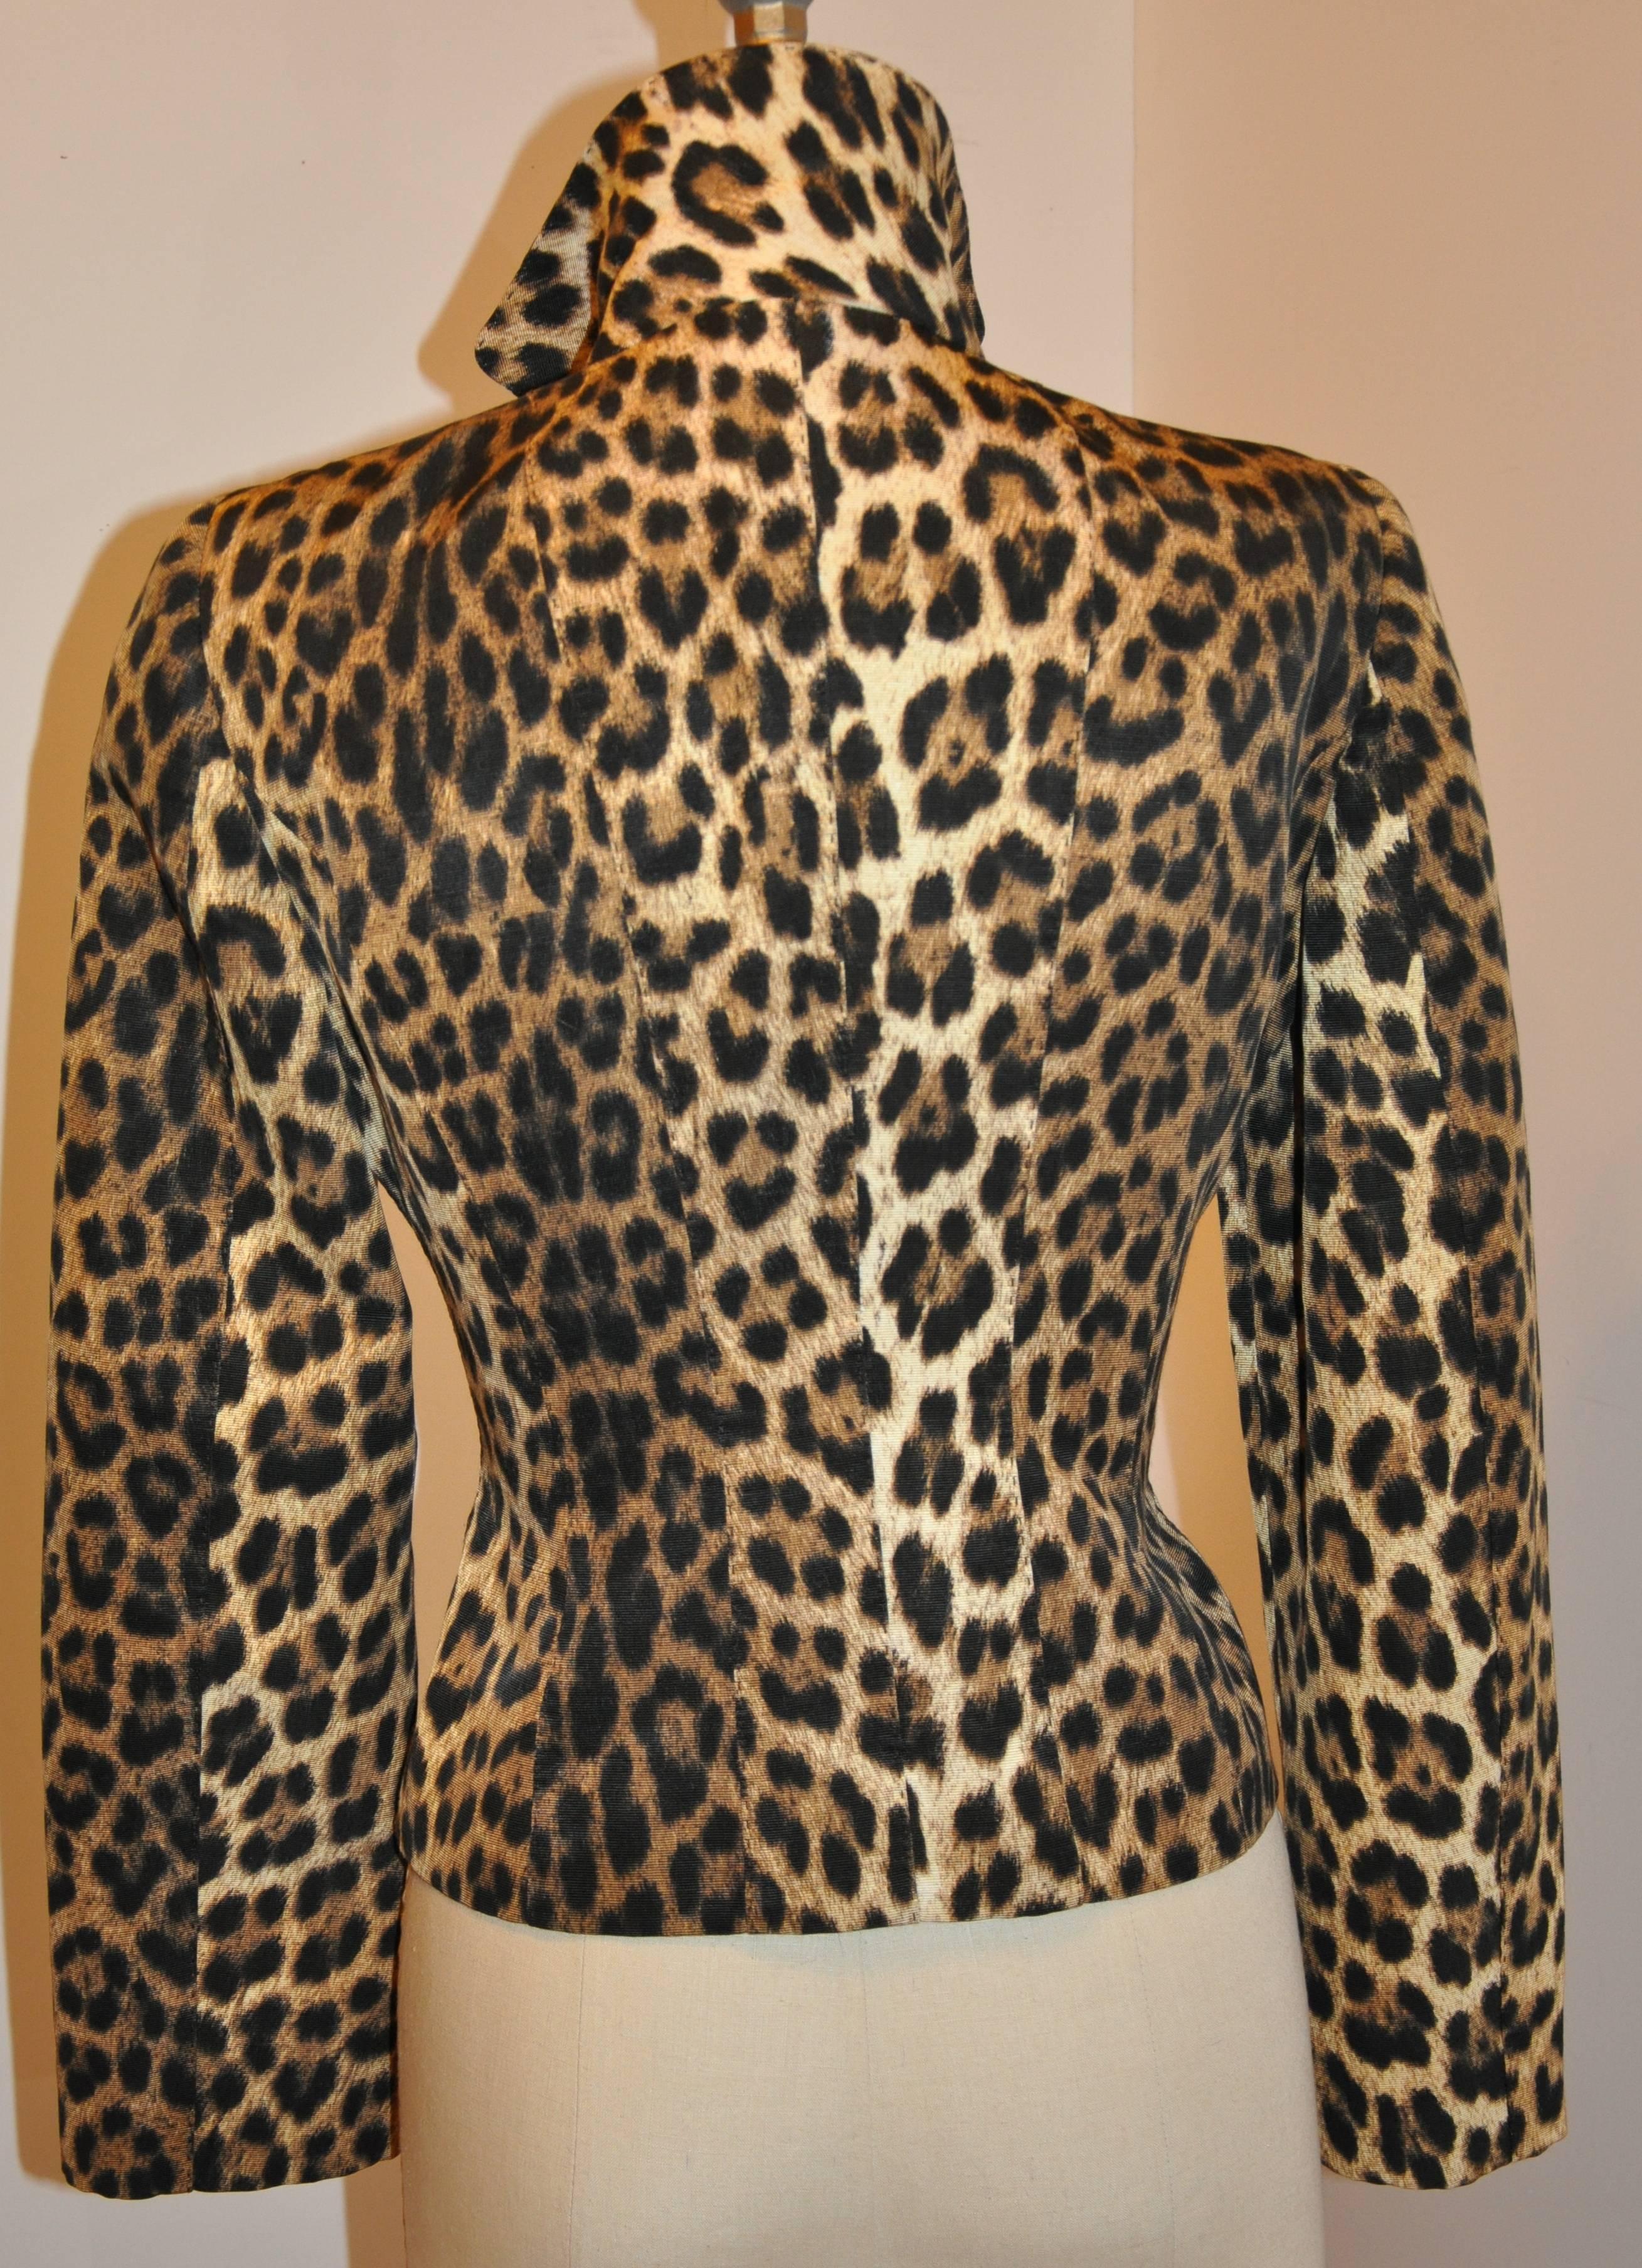        Moschino for Bergdorf Goodman wonderfully wicked leopard print button jacket is fully lined. The front has five buttons as well as two set-in pockets and flaps for a more polished elegant appearance. Made of 60% cotton and 40% rayon, the